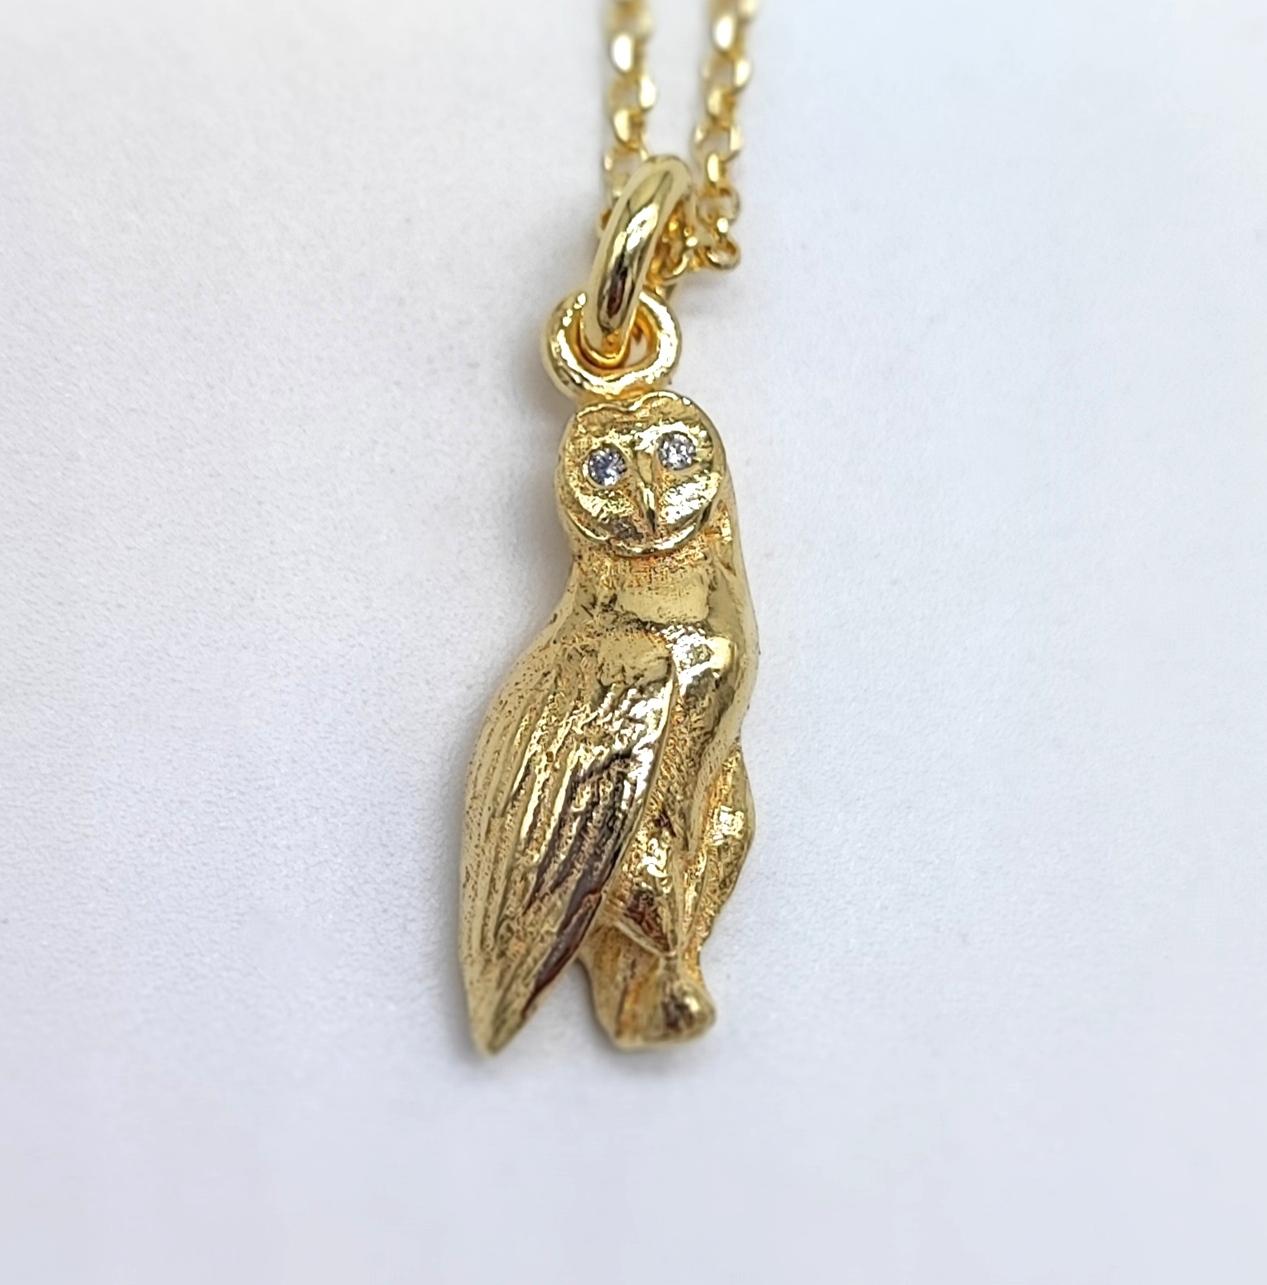 Important 14 kt solid yellow gold choker necklace.
Necklace created entirely by hand by Italian artisans. 
The technique is that of lost-wax microsculpture. In the eyes of the barn owl are set 2 brilliant-cut diamonds.
The necklace is unisex and can